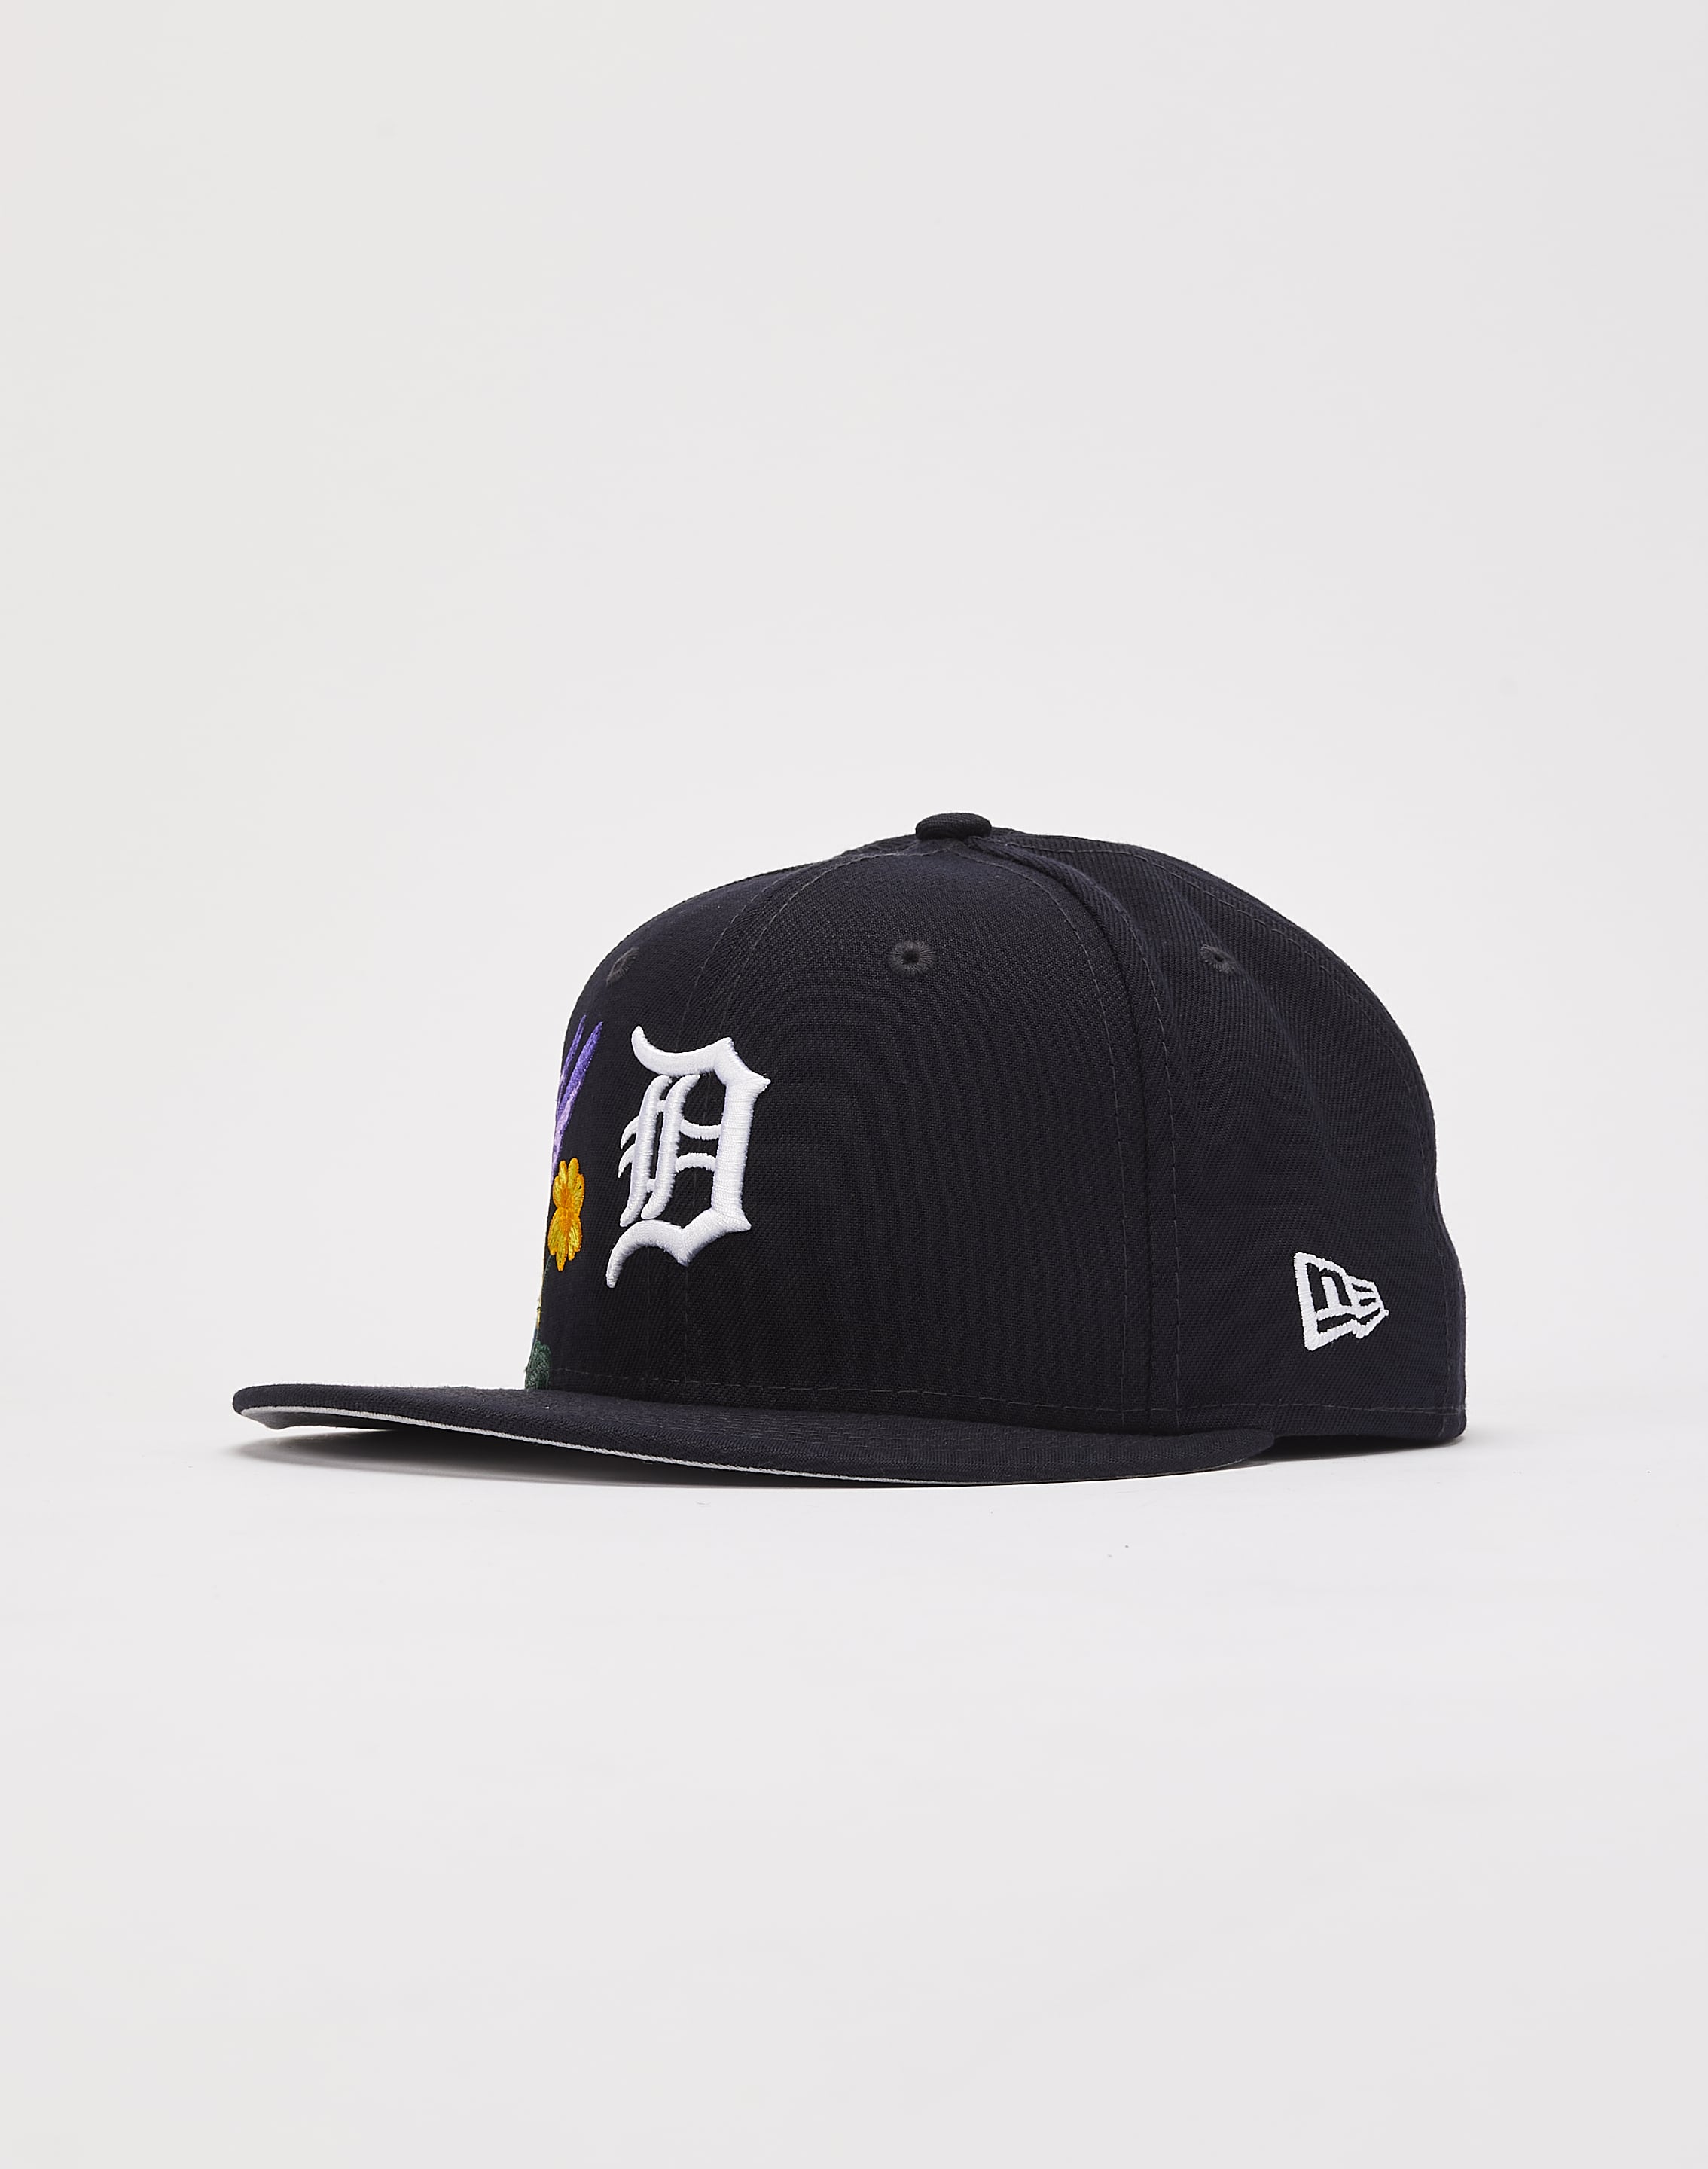 Detroit Tigers White 59FIFTY Fitted Cap